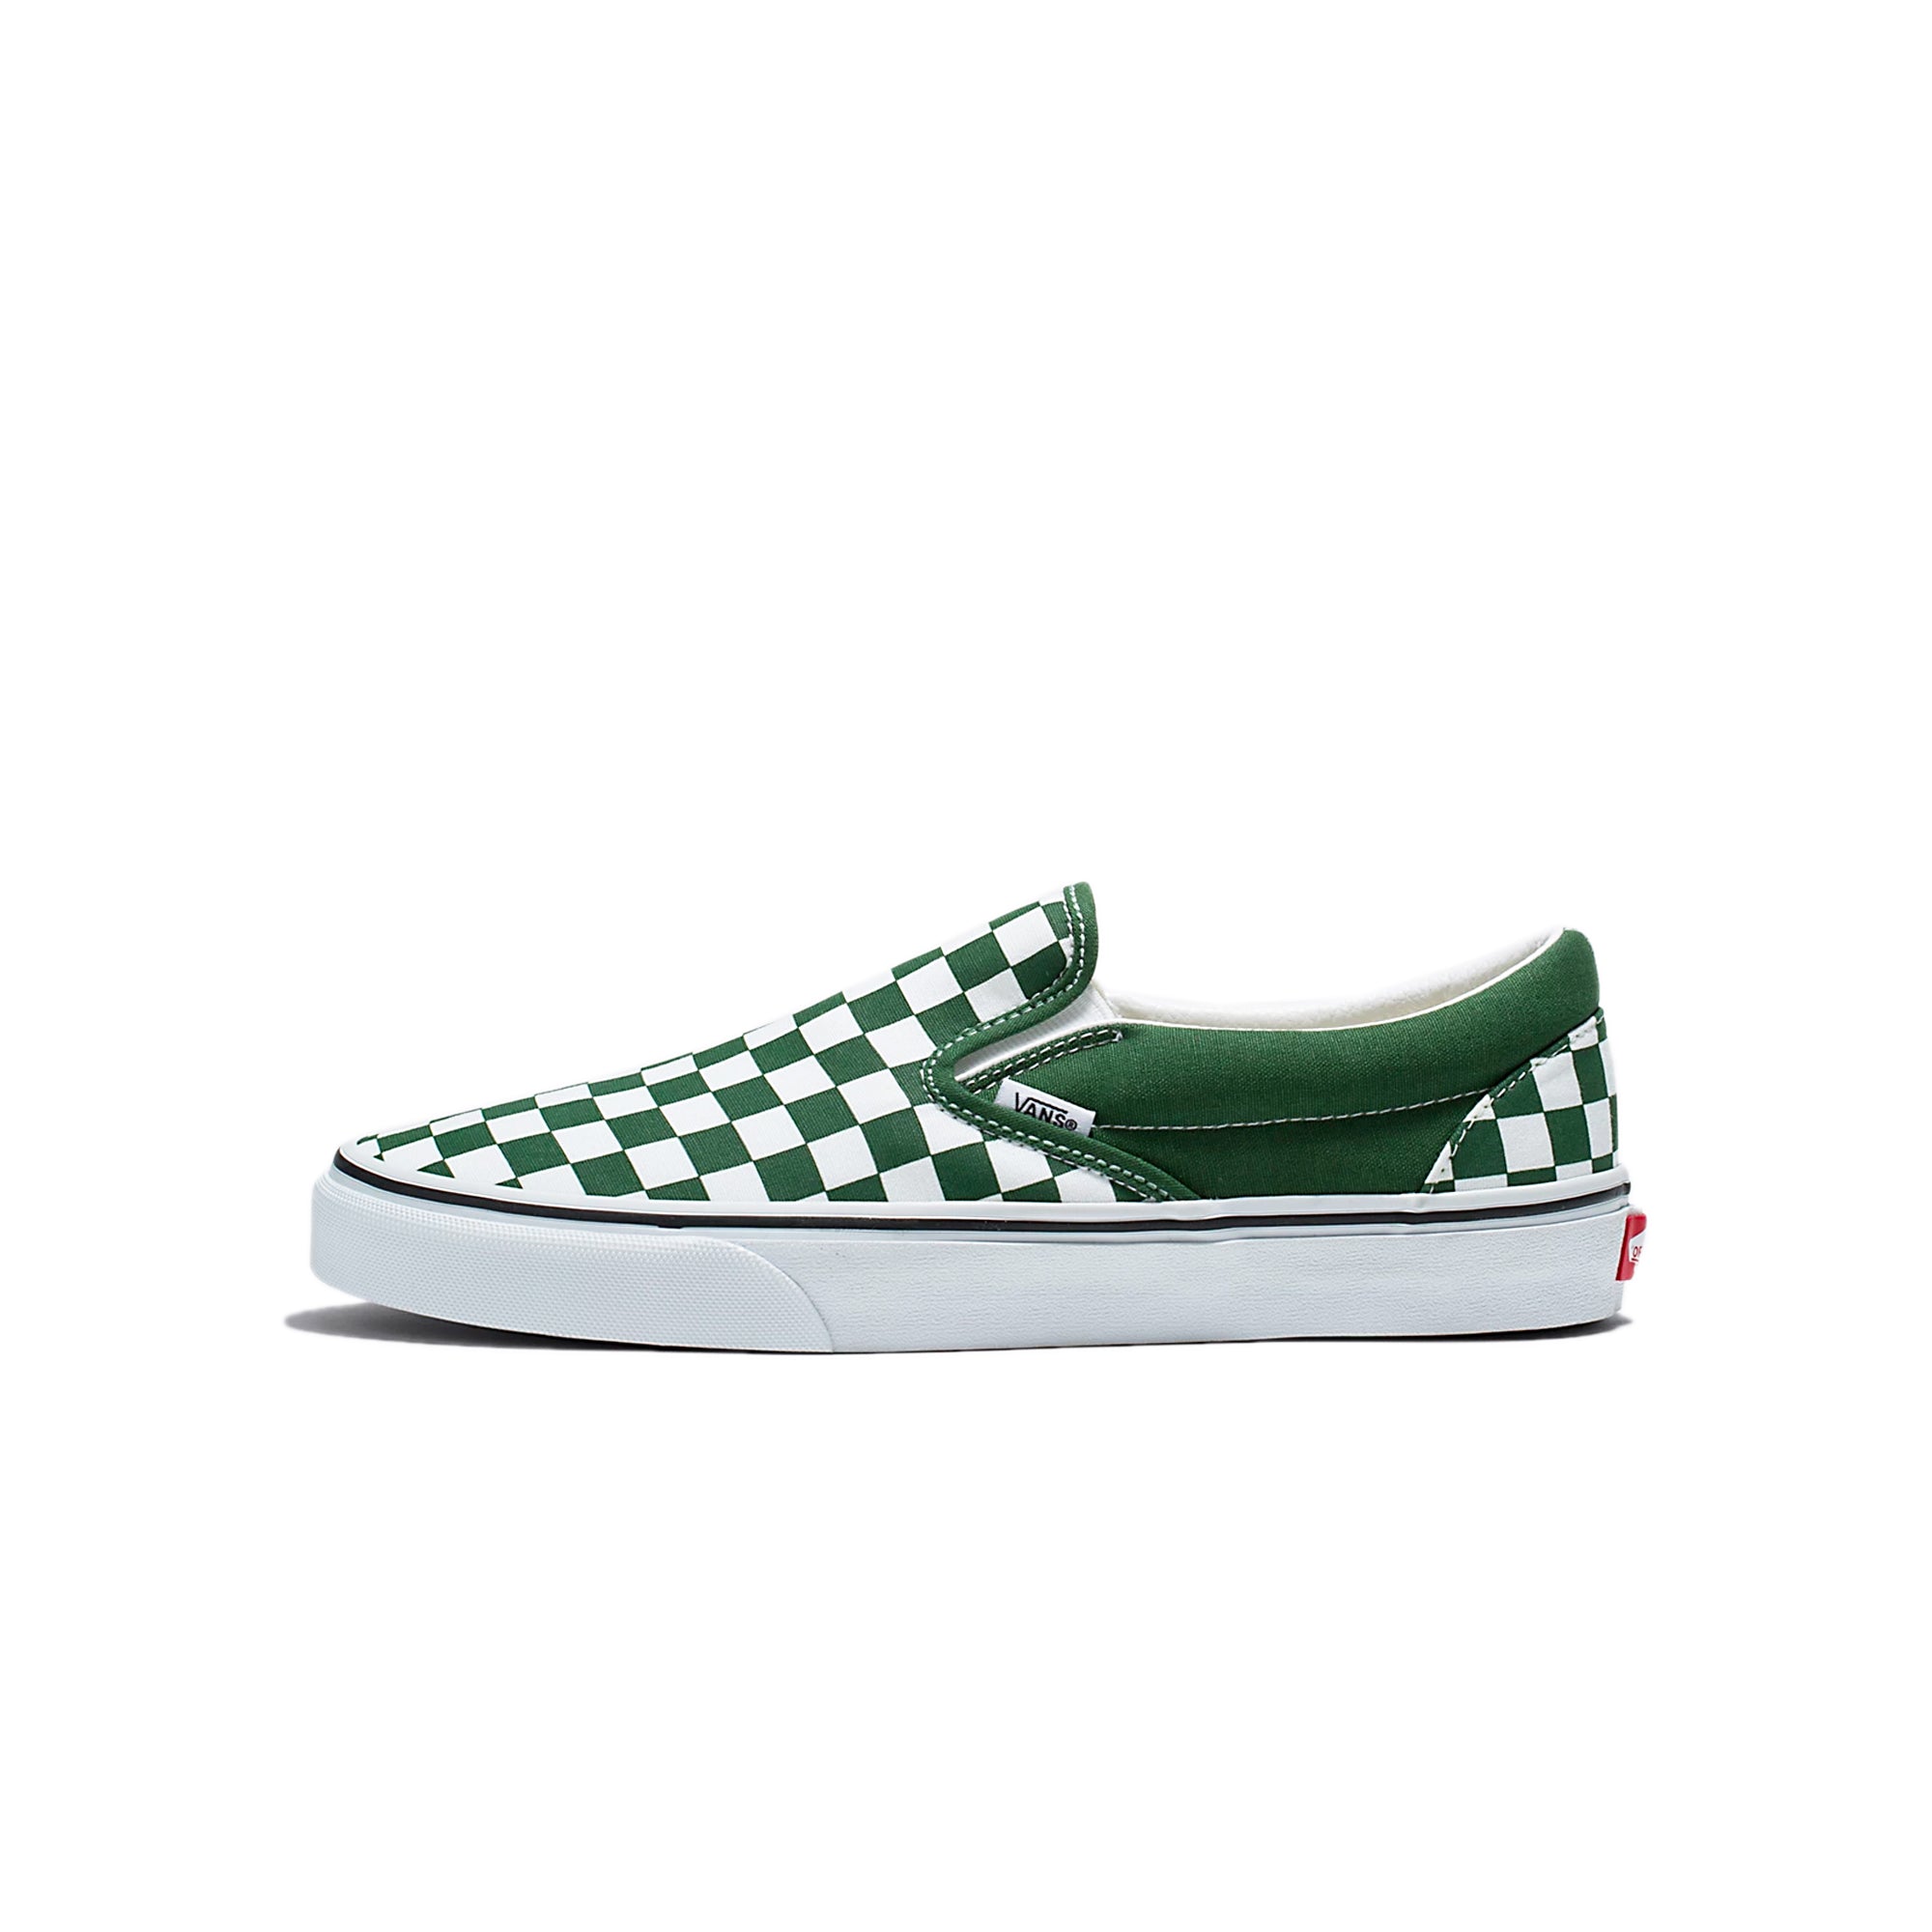 Vans Mens Classic Slip-On Color Theory Shoes